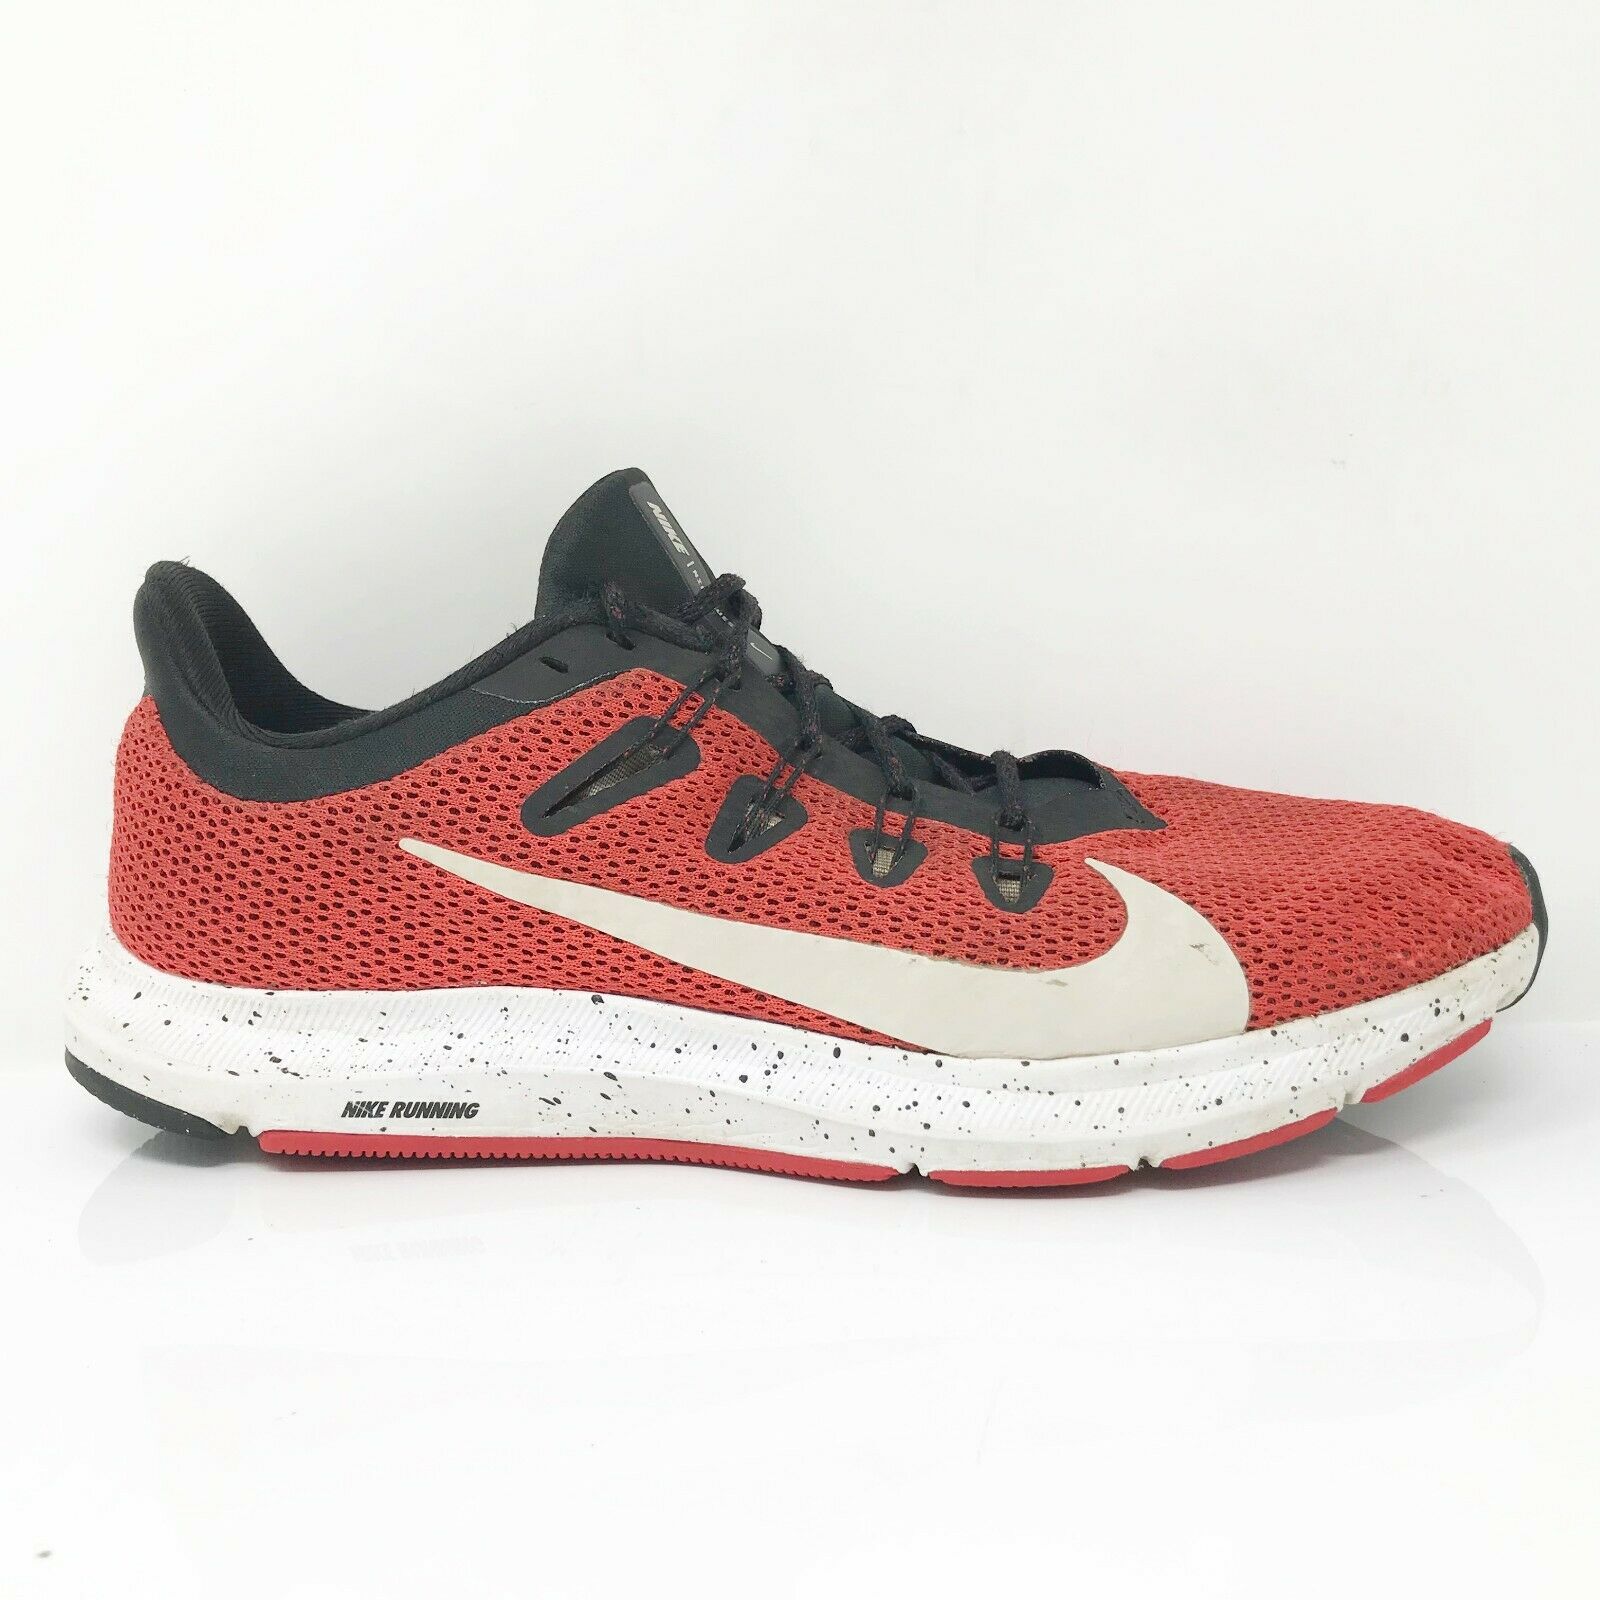 Nike Mens Quest 2 SE CJ6185-600 Red Black Running Shoes Sneakers Size 9.5